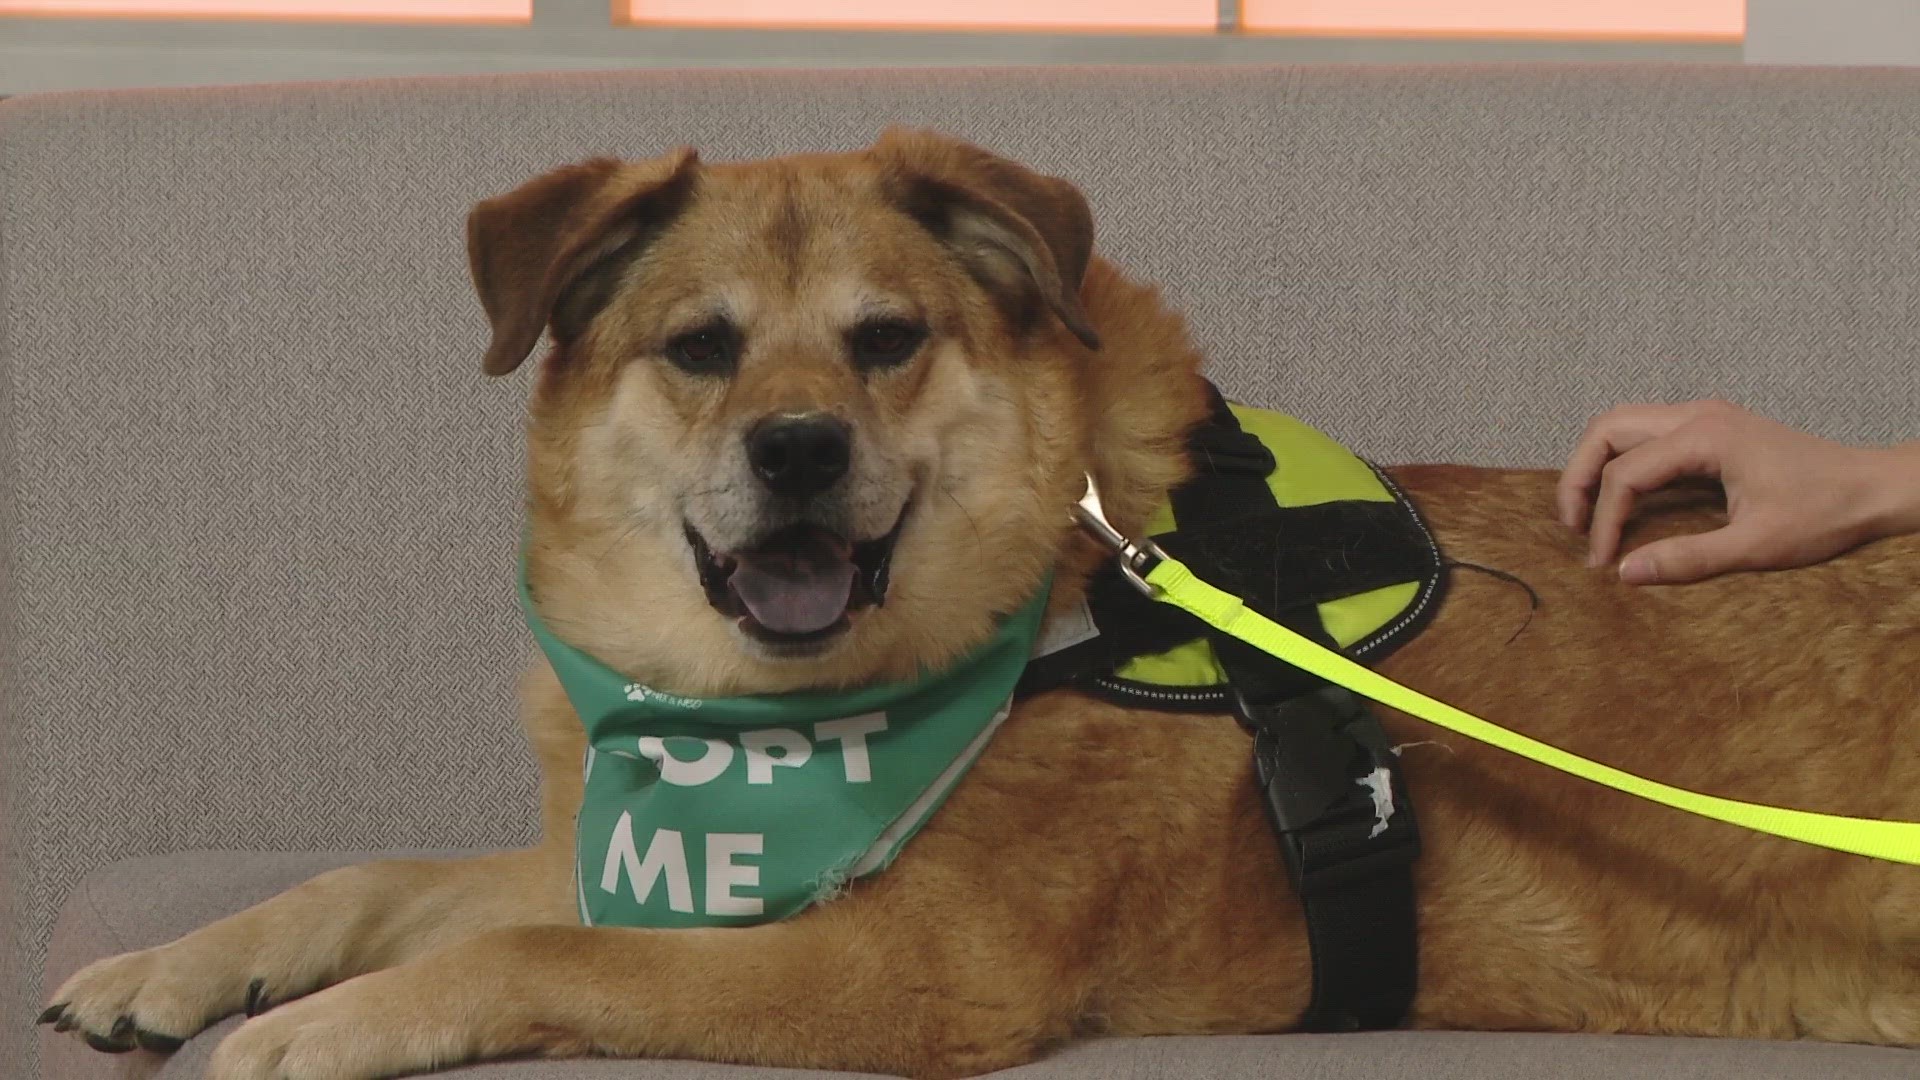 He is a 6-year-old Chow/Shepherd mix. He is lovely and would love to spend his golden years being your best friend! He is available for adoption at PetSmart South.